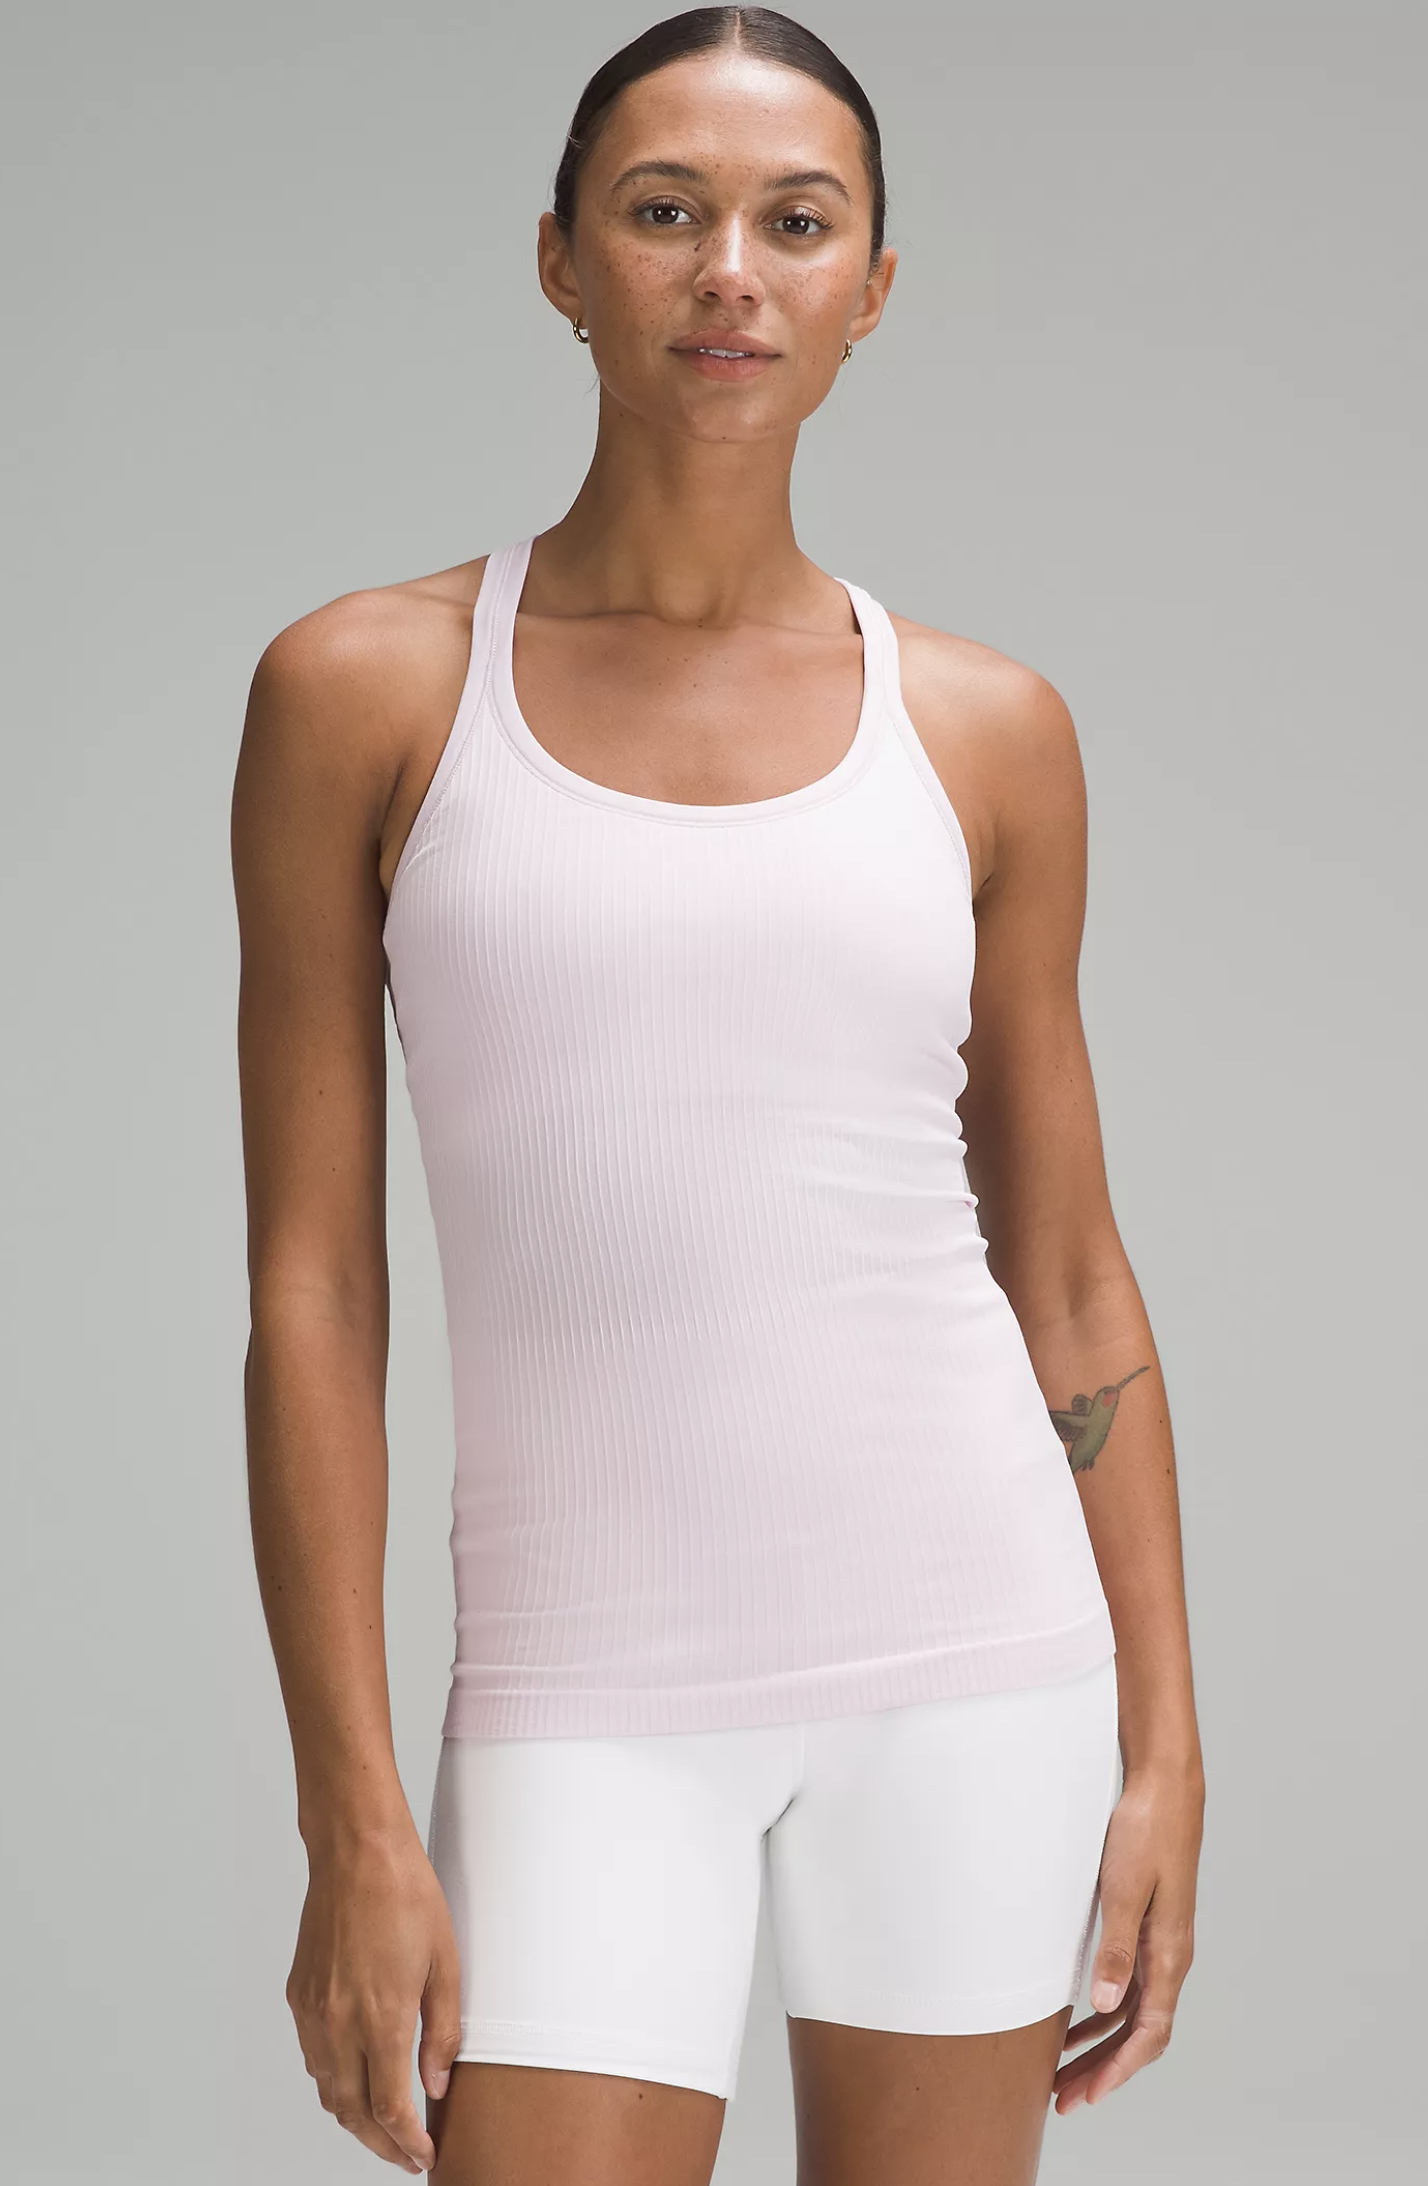 front view of model wearing the tank top in pink